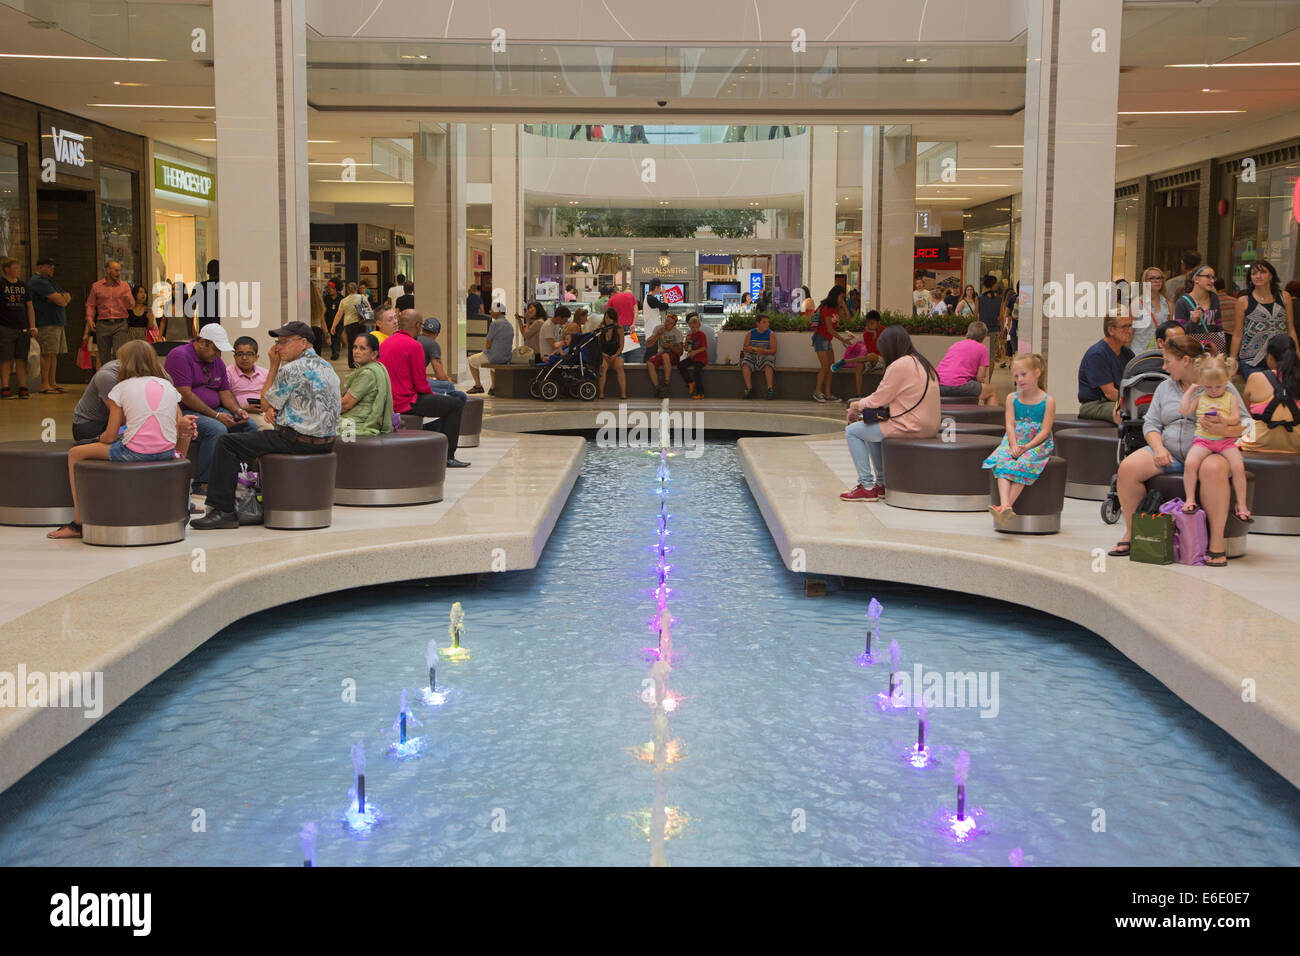 West Edmonton mall, one of the largest shopping centers in the world. Stock Photo